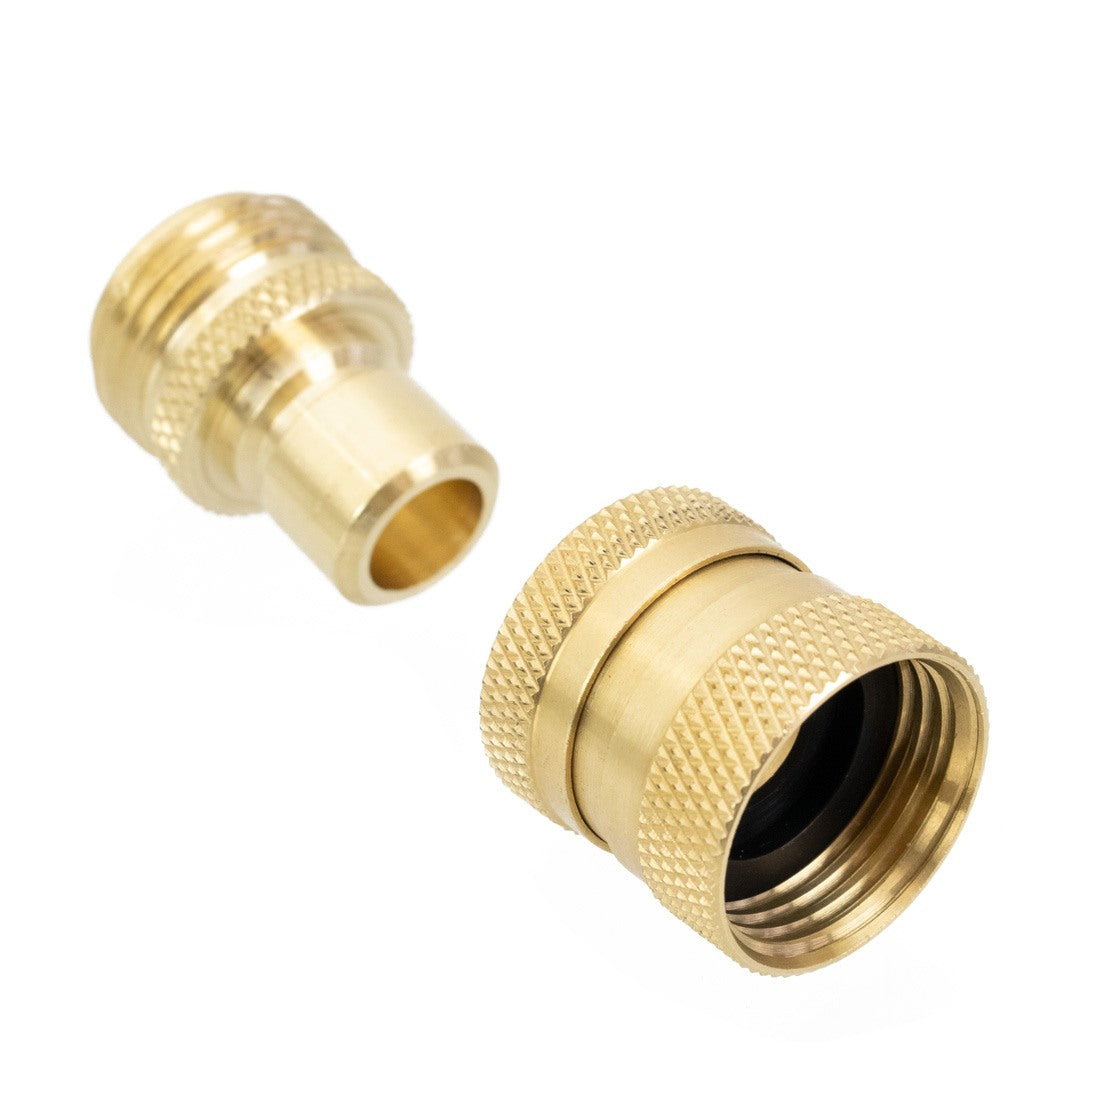 PWP Garden Hose Quick Connect Male and Female Set Brass Separated View